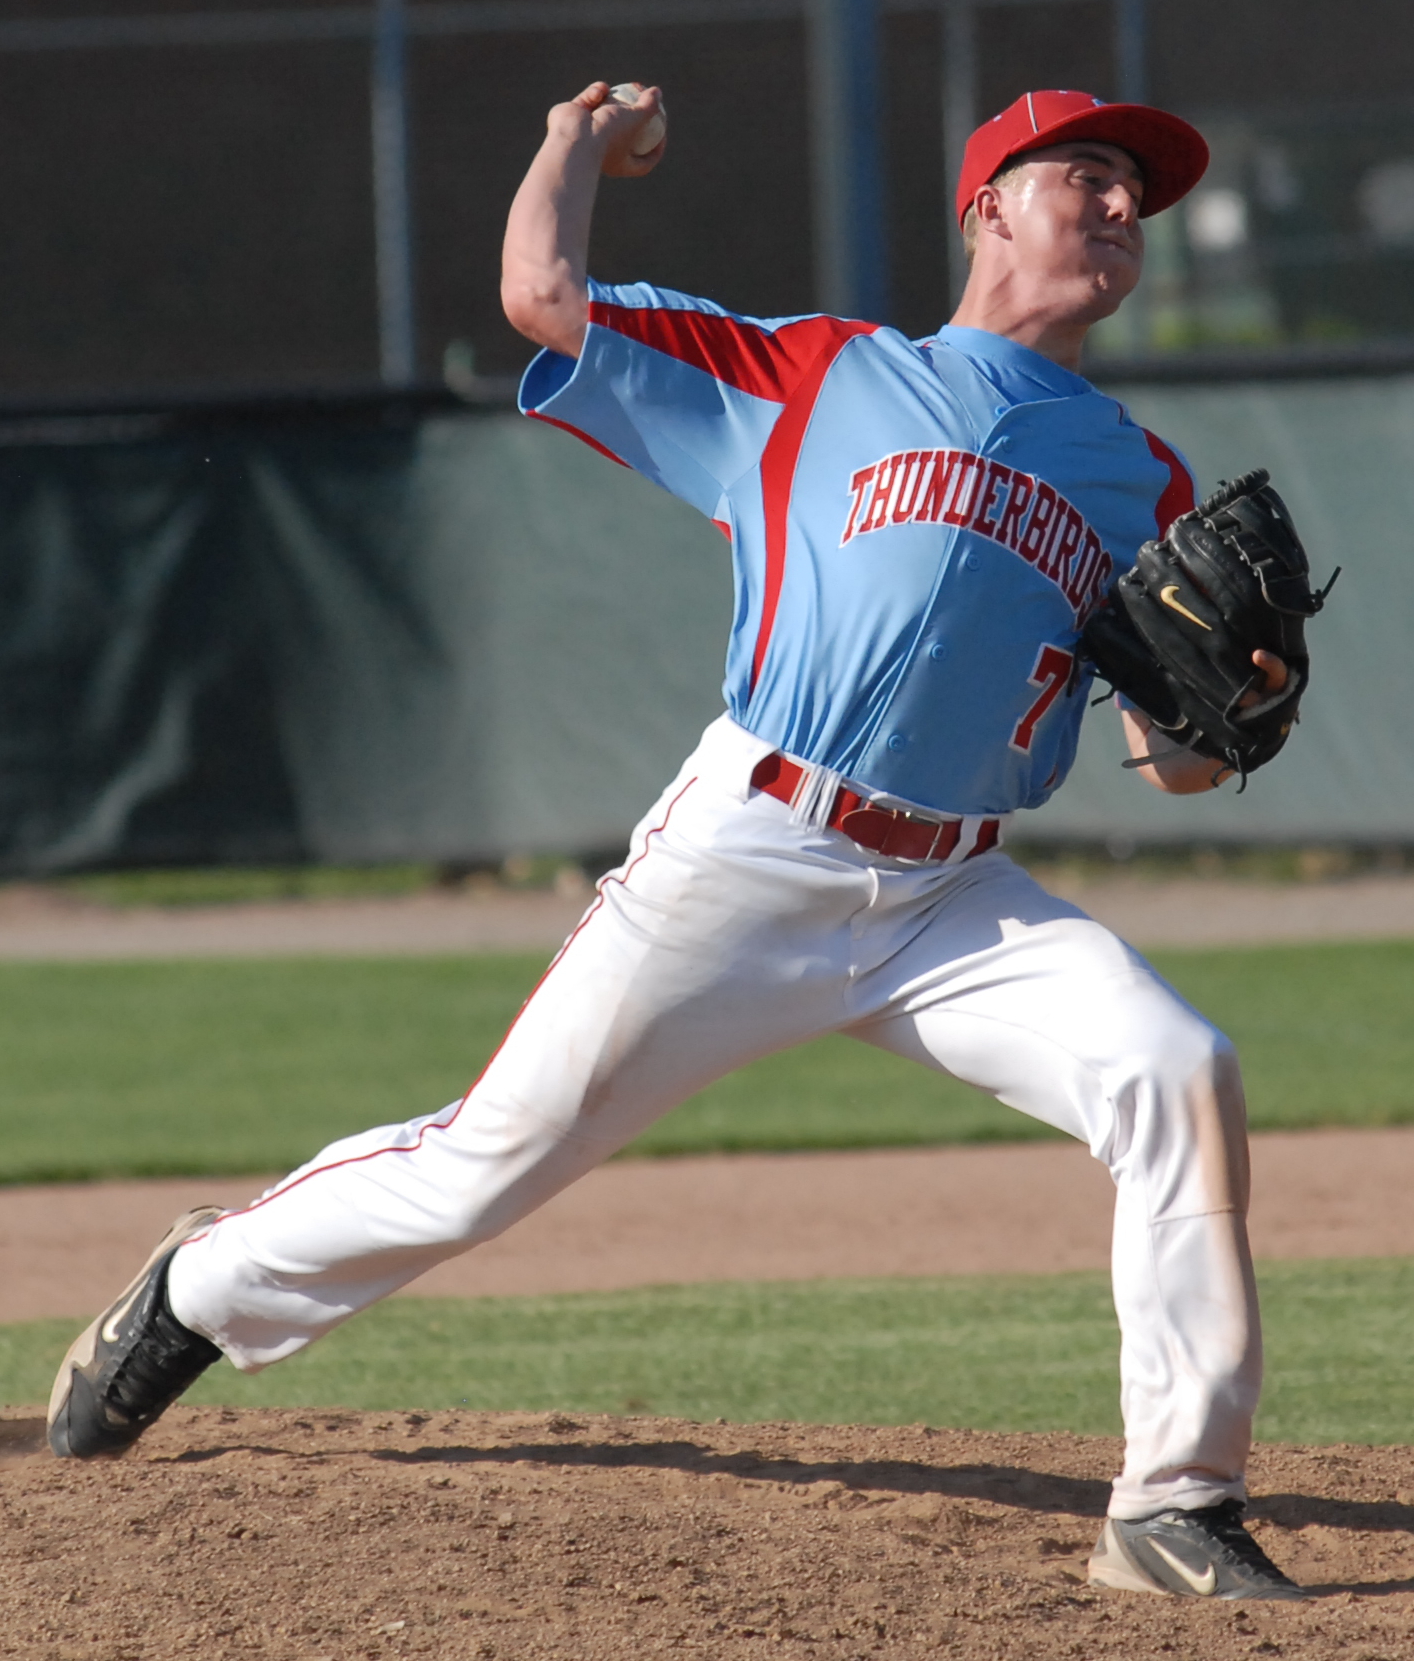 Colin Stolly, 2014 RHP